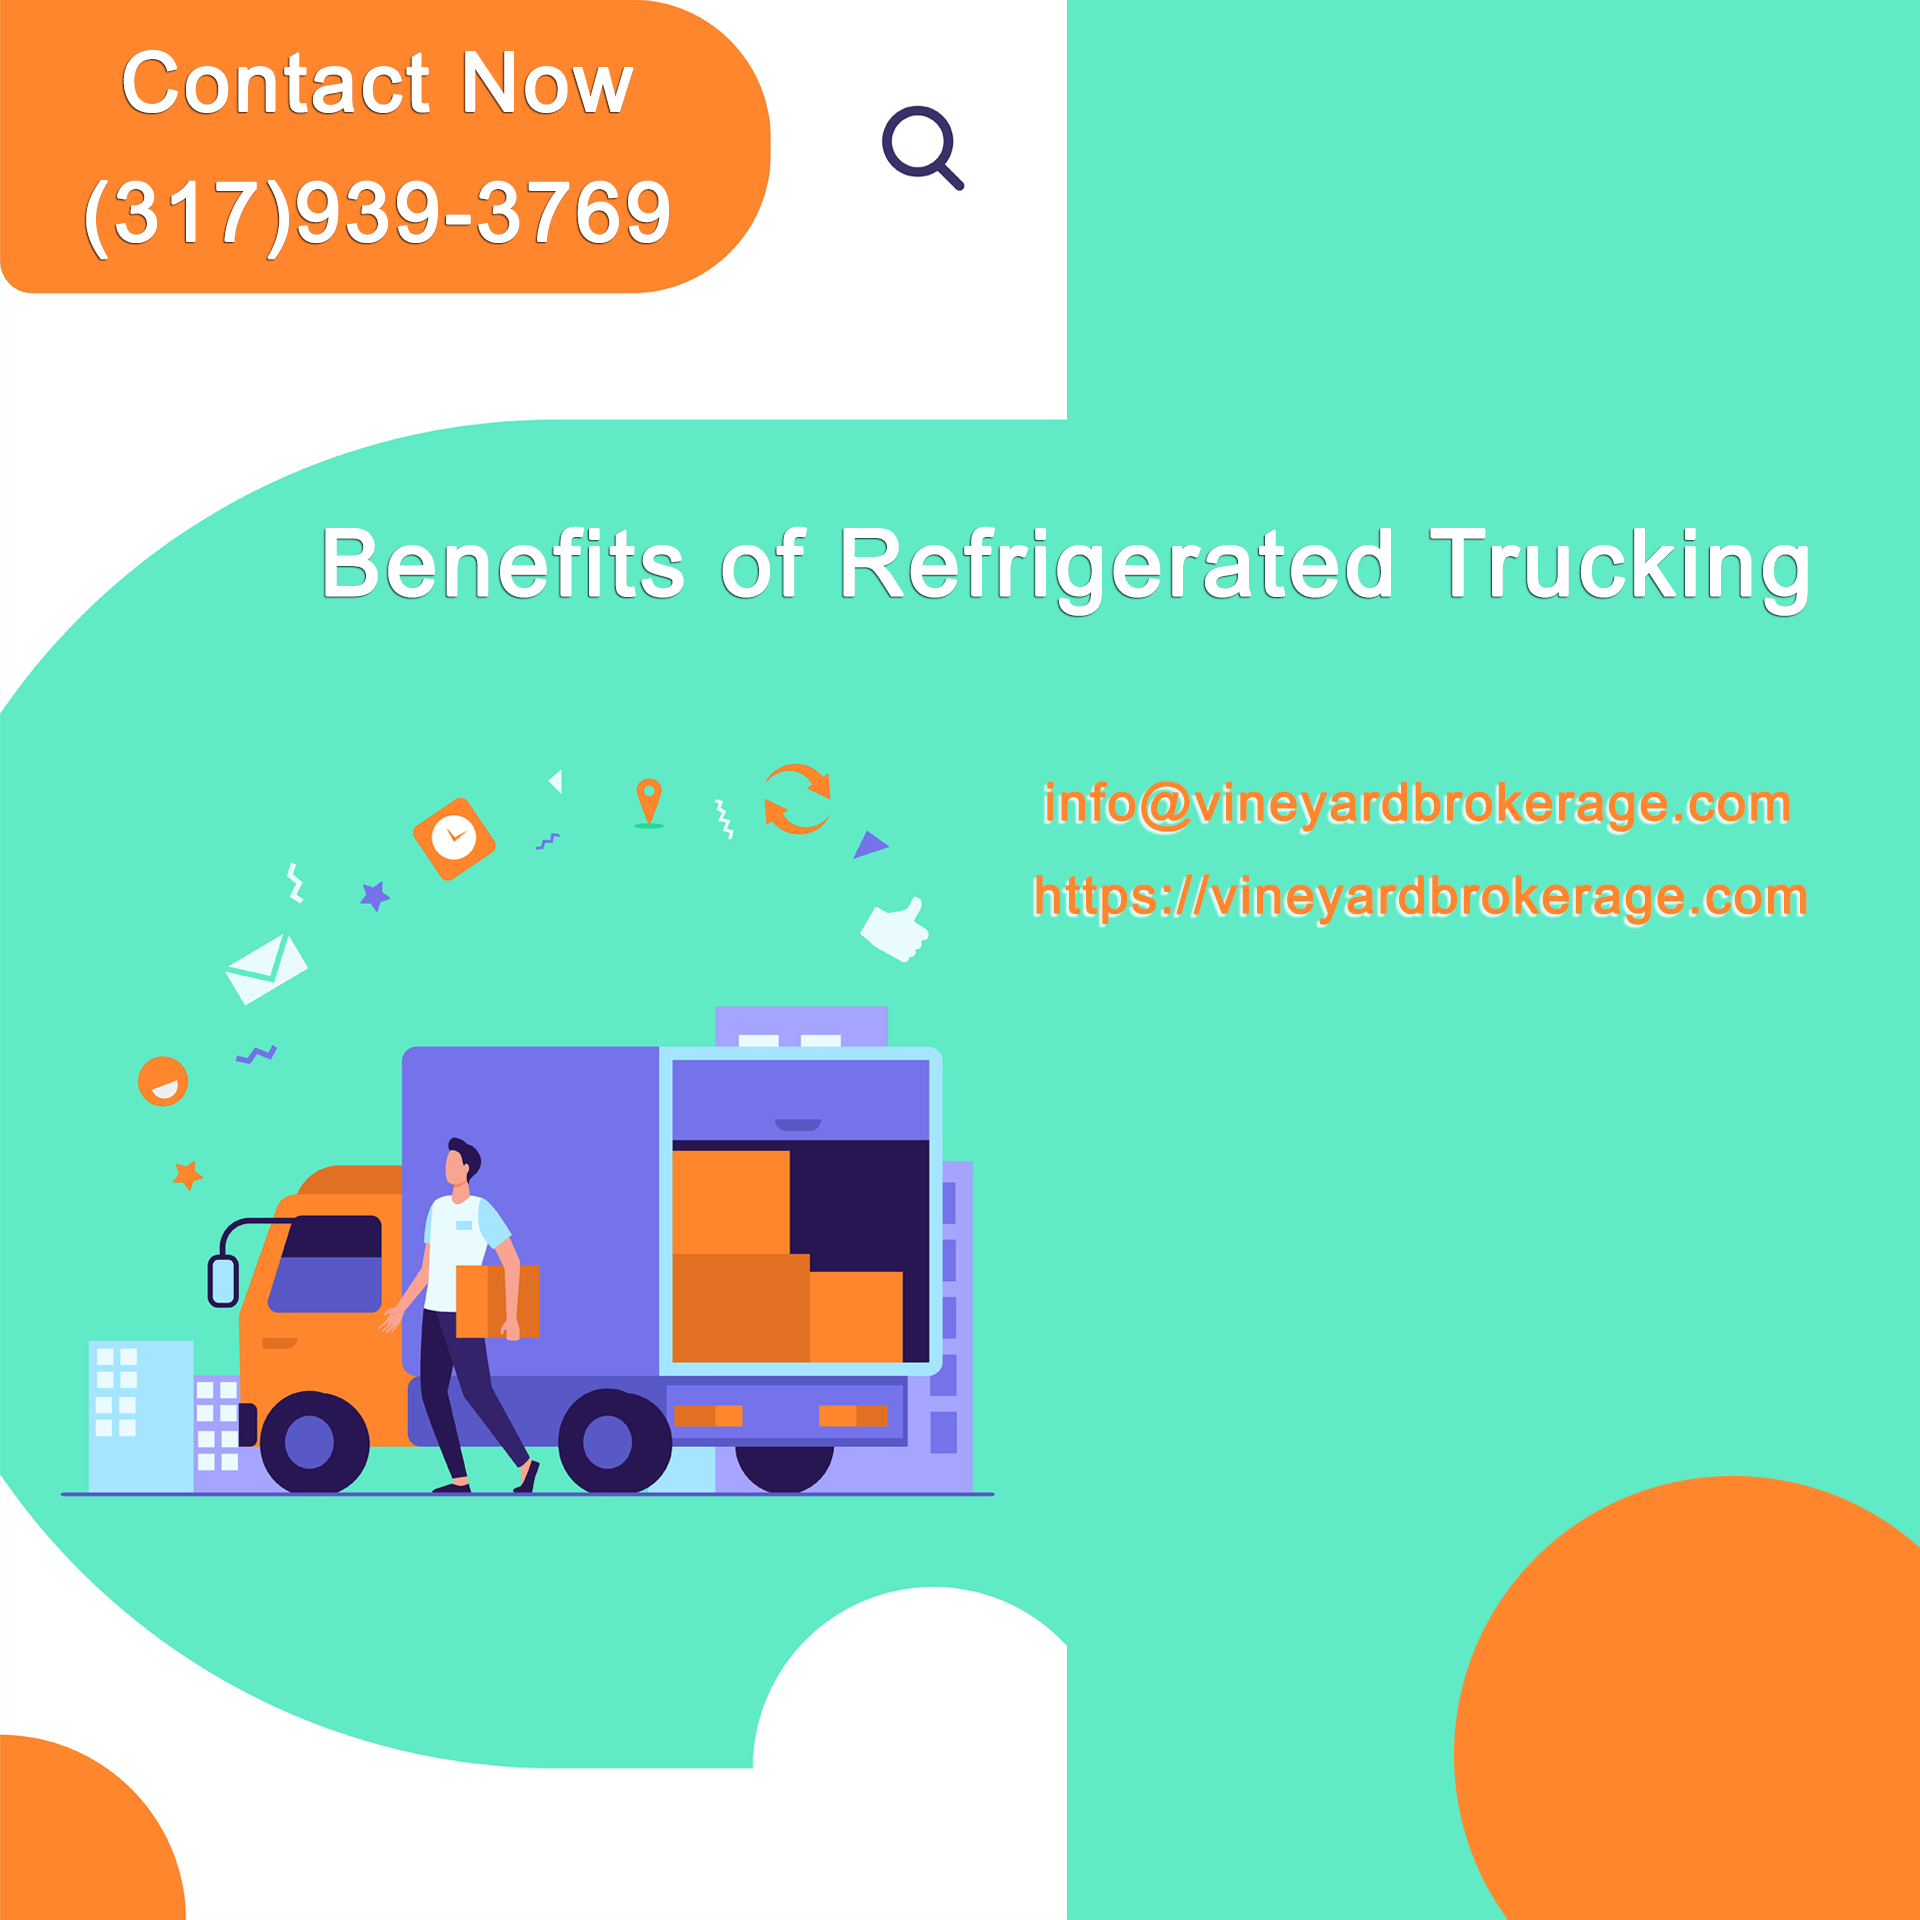 Benefits of Refrigerated Trucking